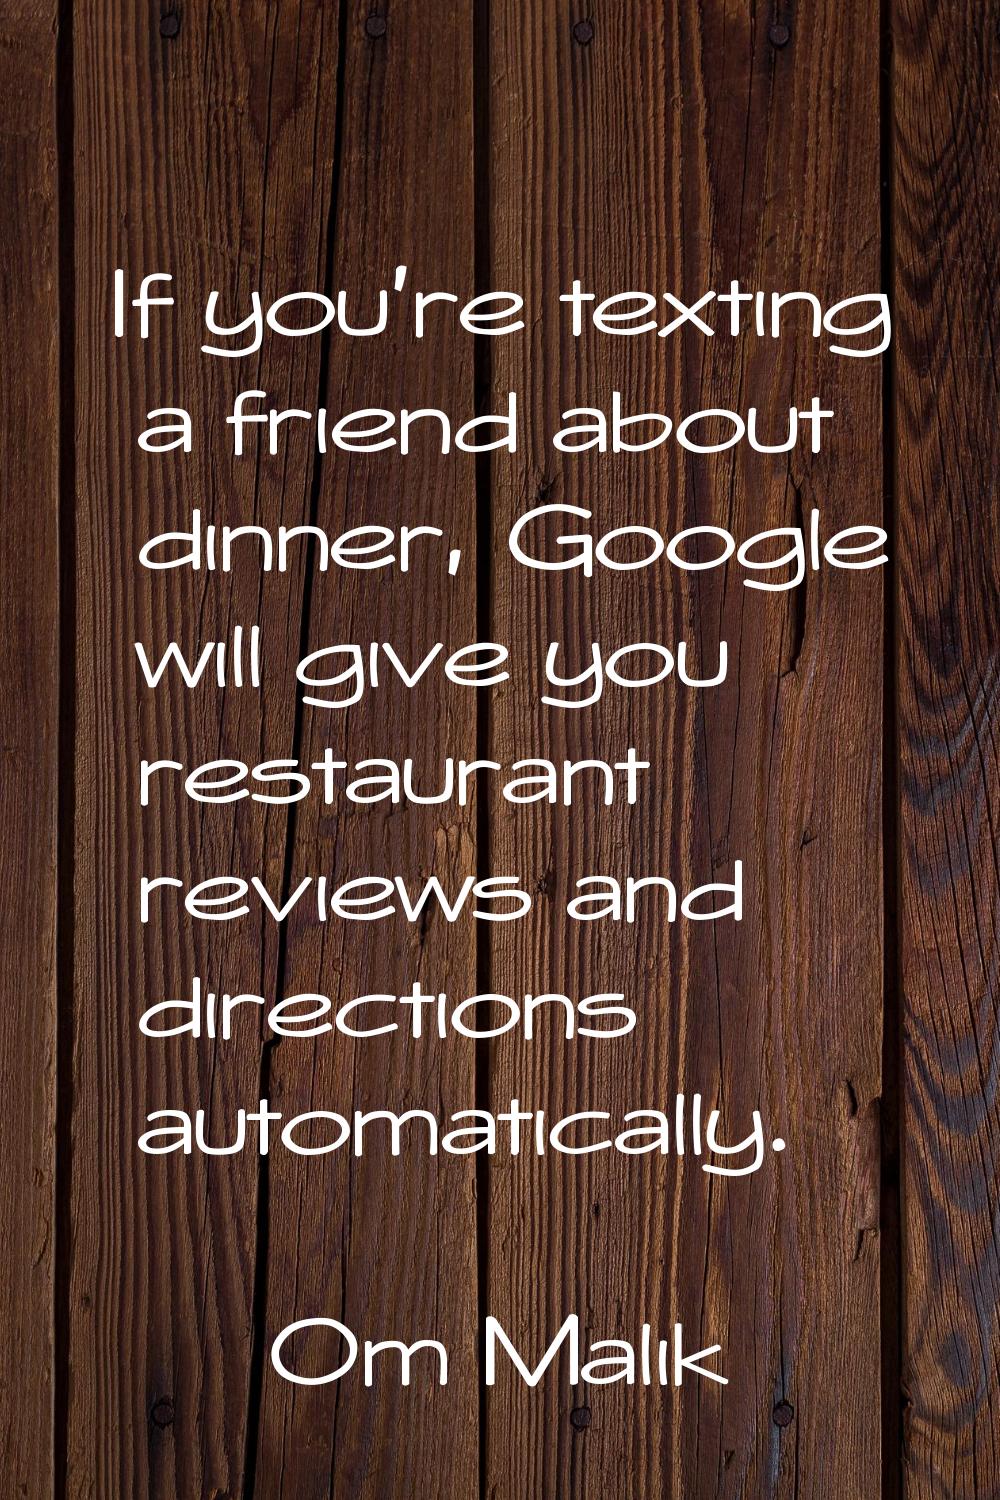 If you're texting a friend about dinner, Google will give you restaurant reviews and directions aut